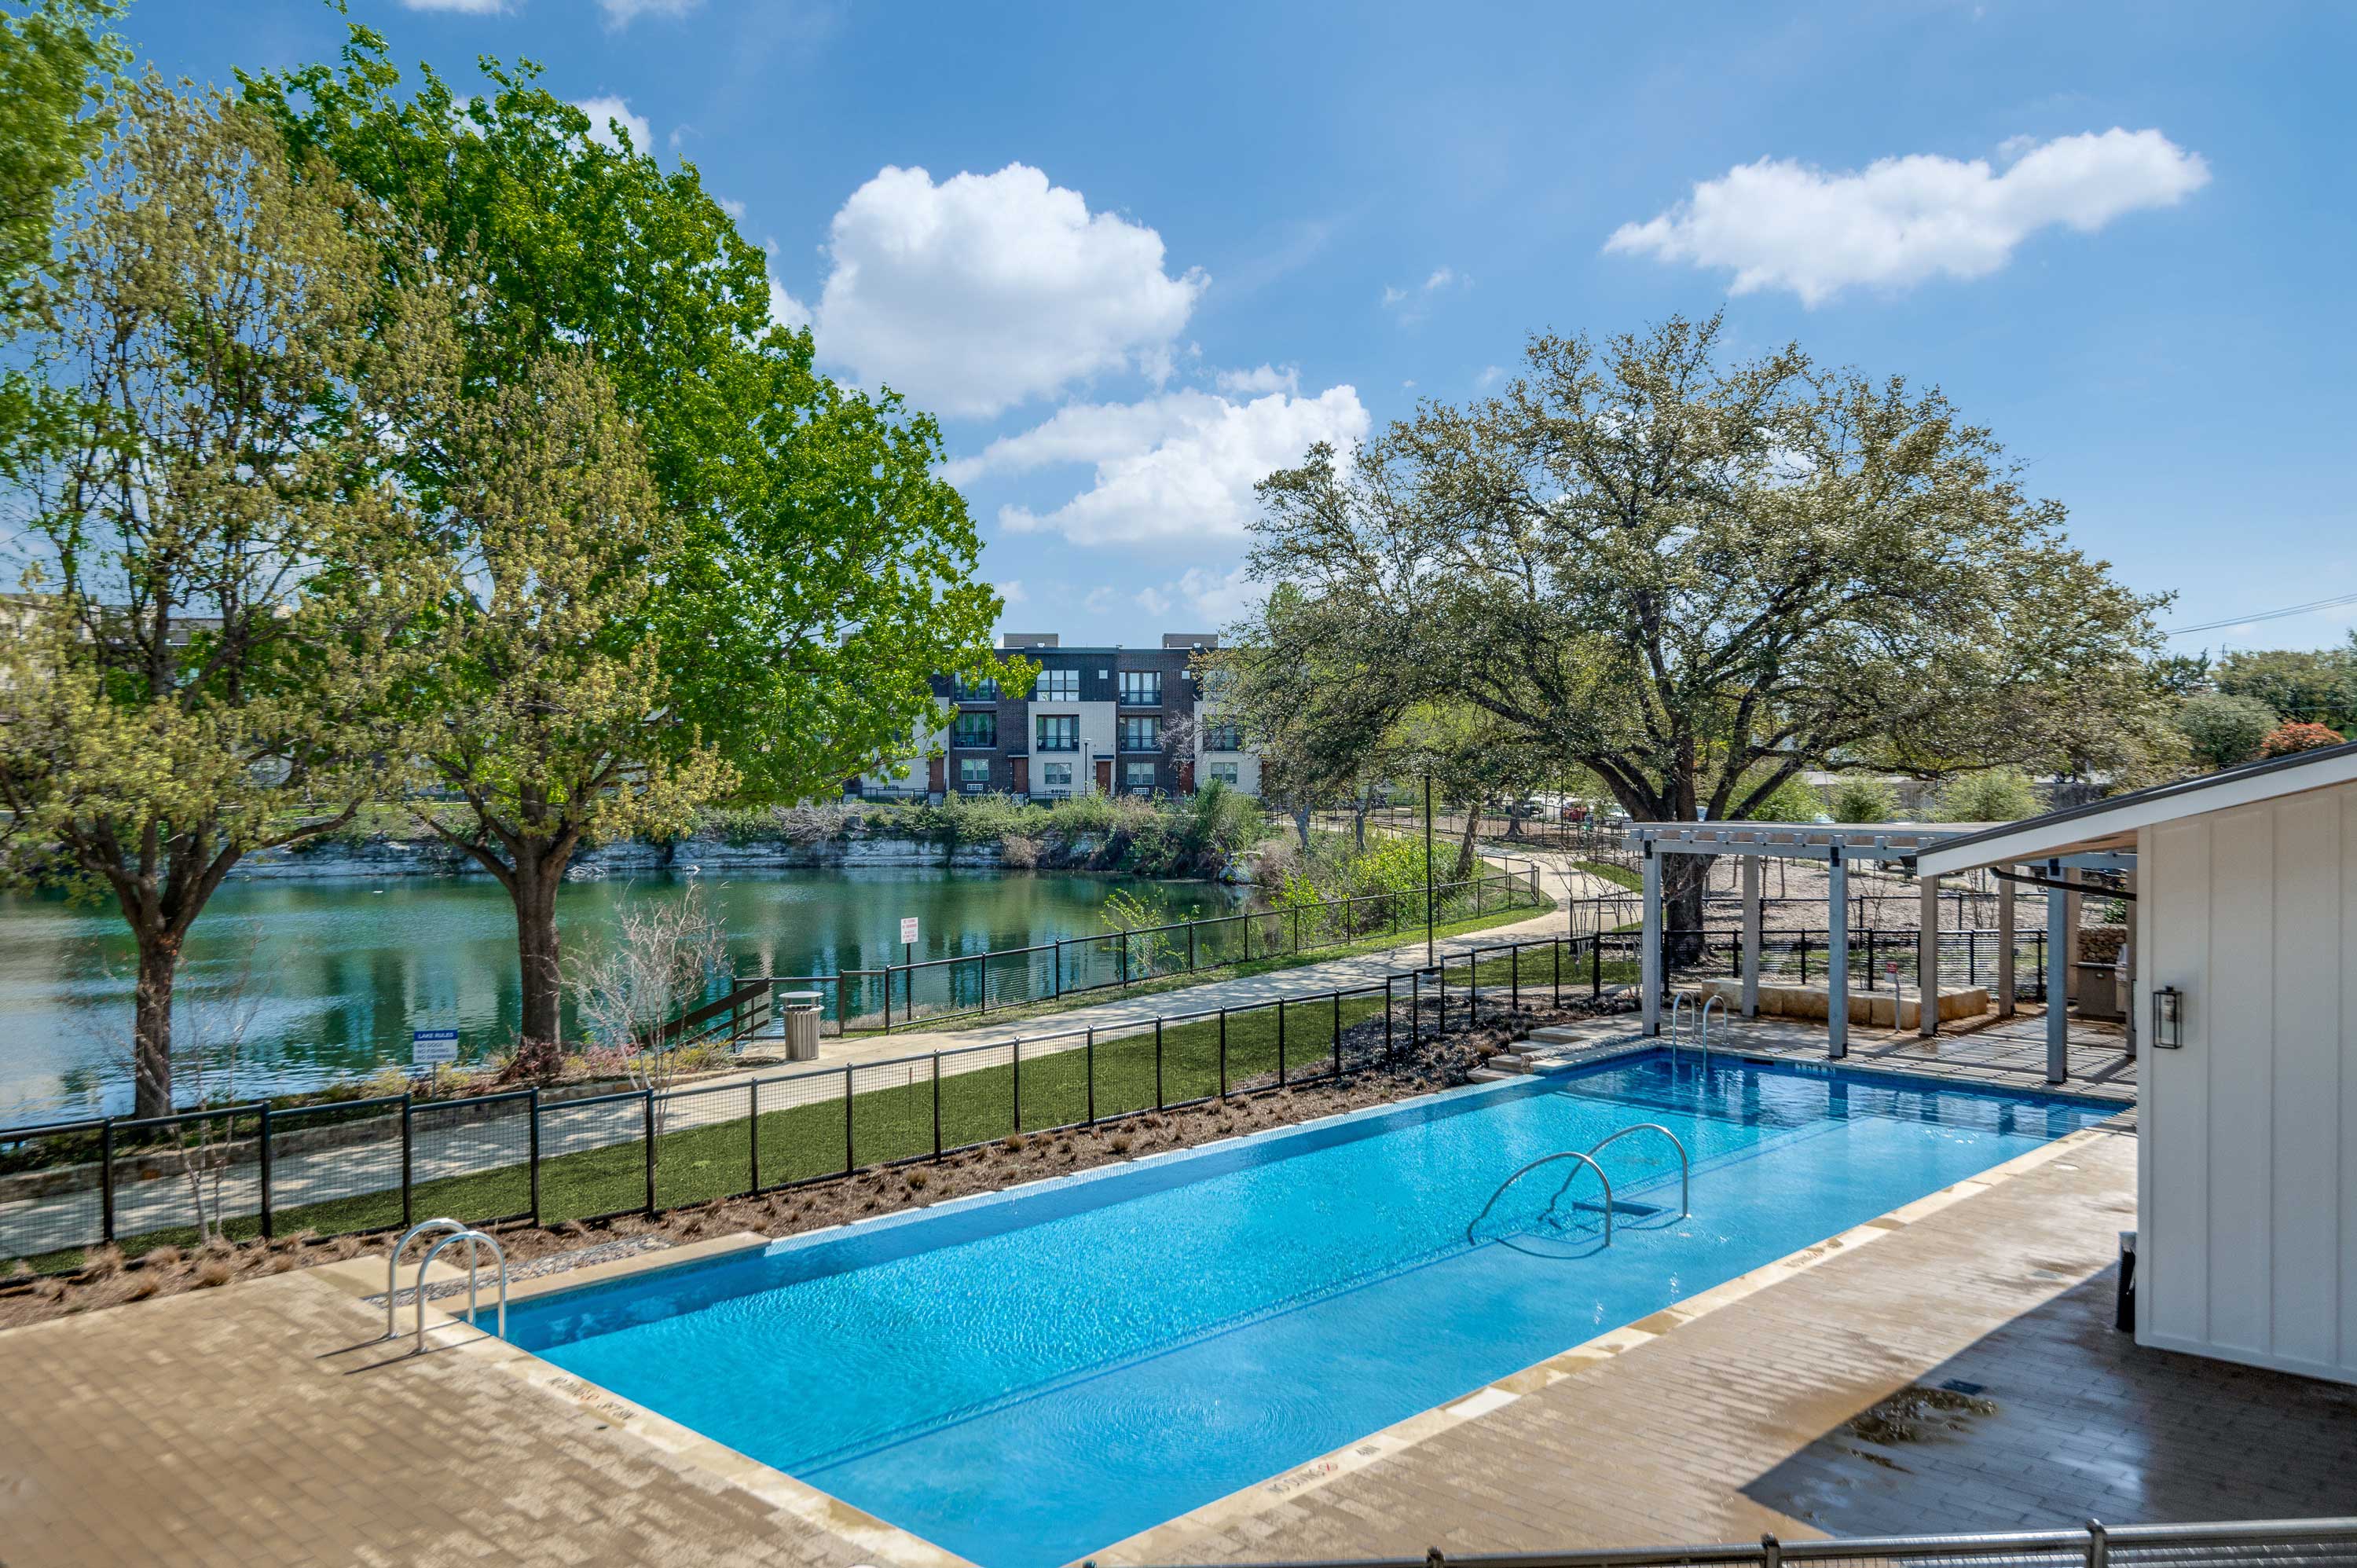 Gated Pool Area Overlooking 2-Acre Blue Lake at Midway Row House in North Dallas. 